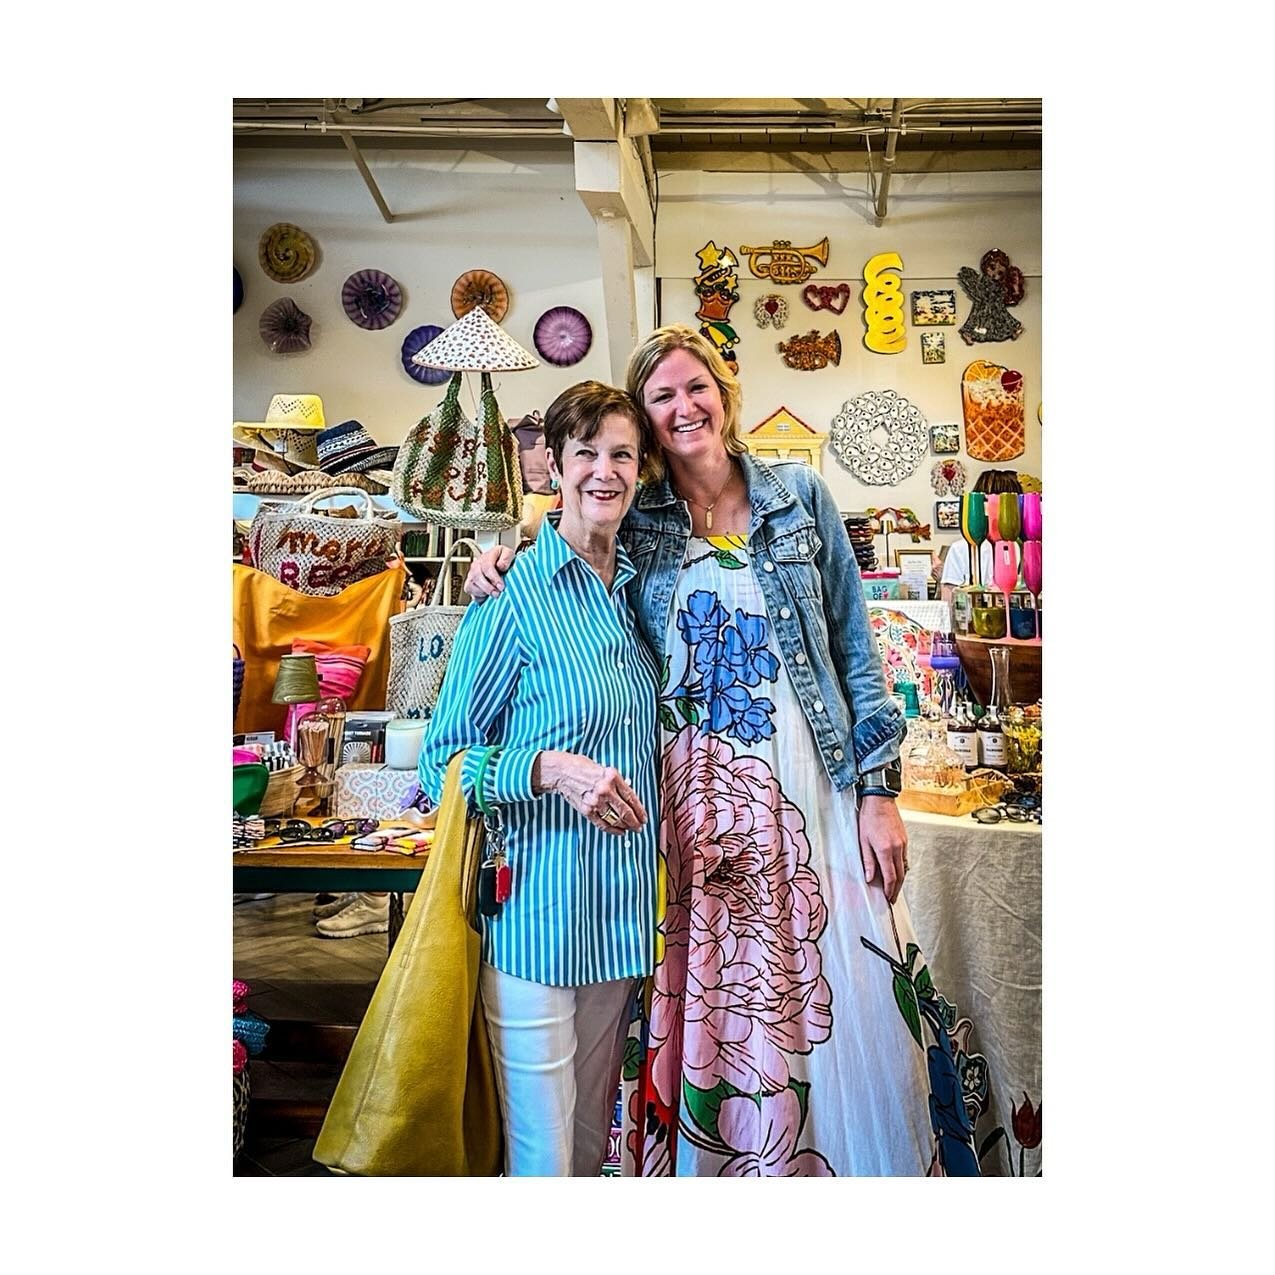 🎁@judyattherink PAST &amp; PRESENT!..
The founder of our incredible gift shop &amp; our current fearless leader! They&rsquo;ve got #gifts to suit your every need and whim right here at @therinknola! 🥂✨
_______
[📸: @tonygelderman]
#neworleans #gard